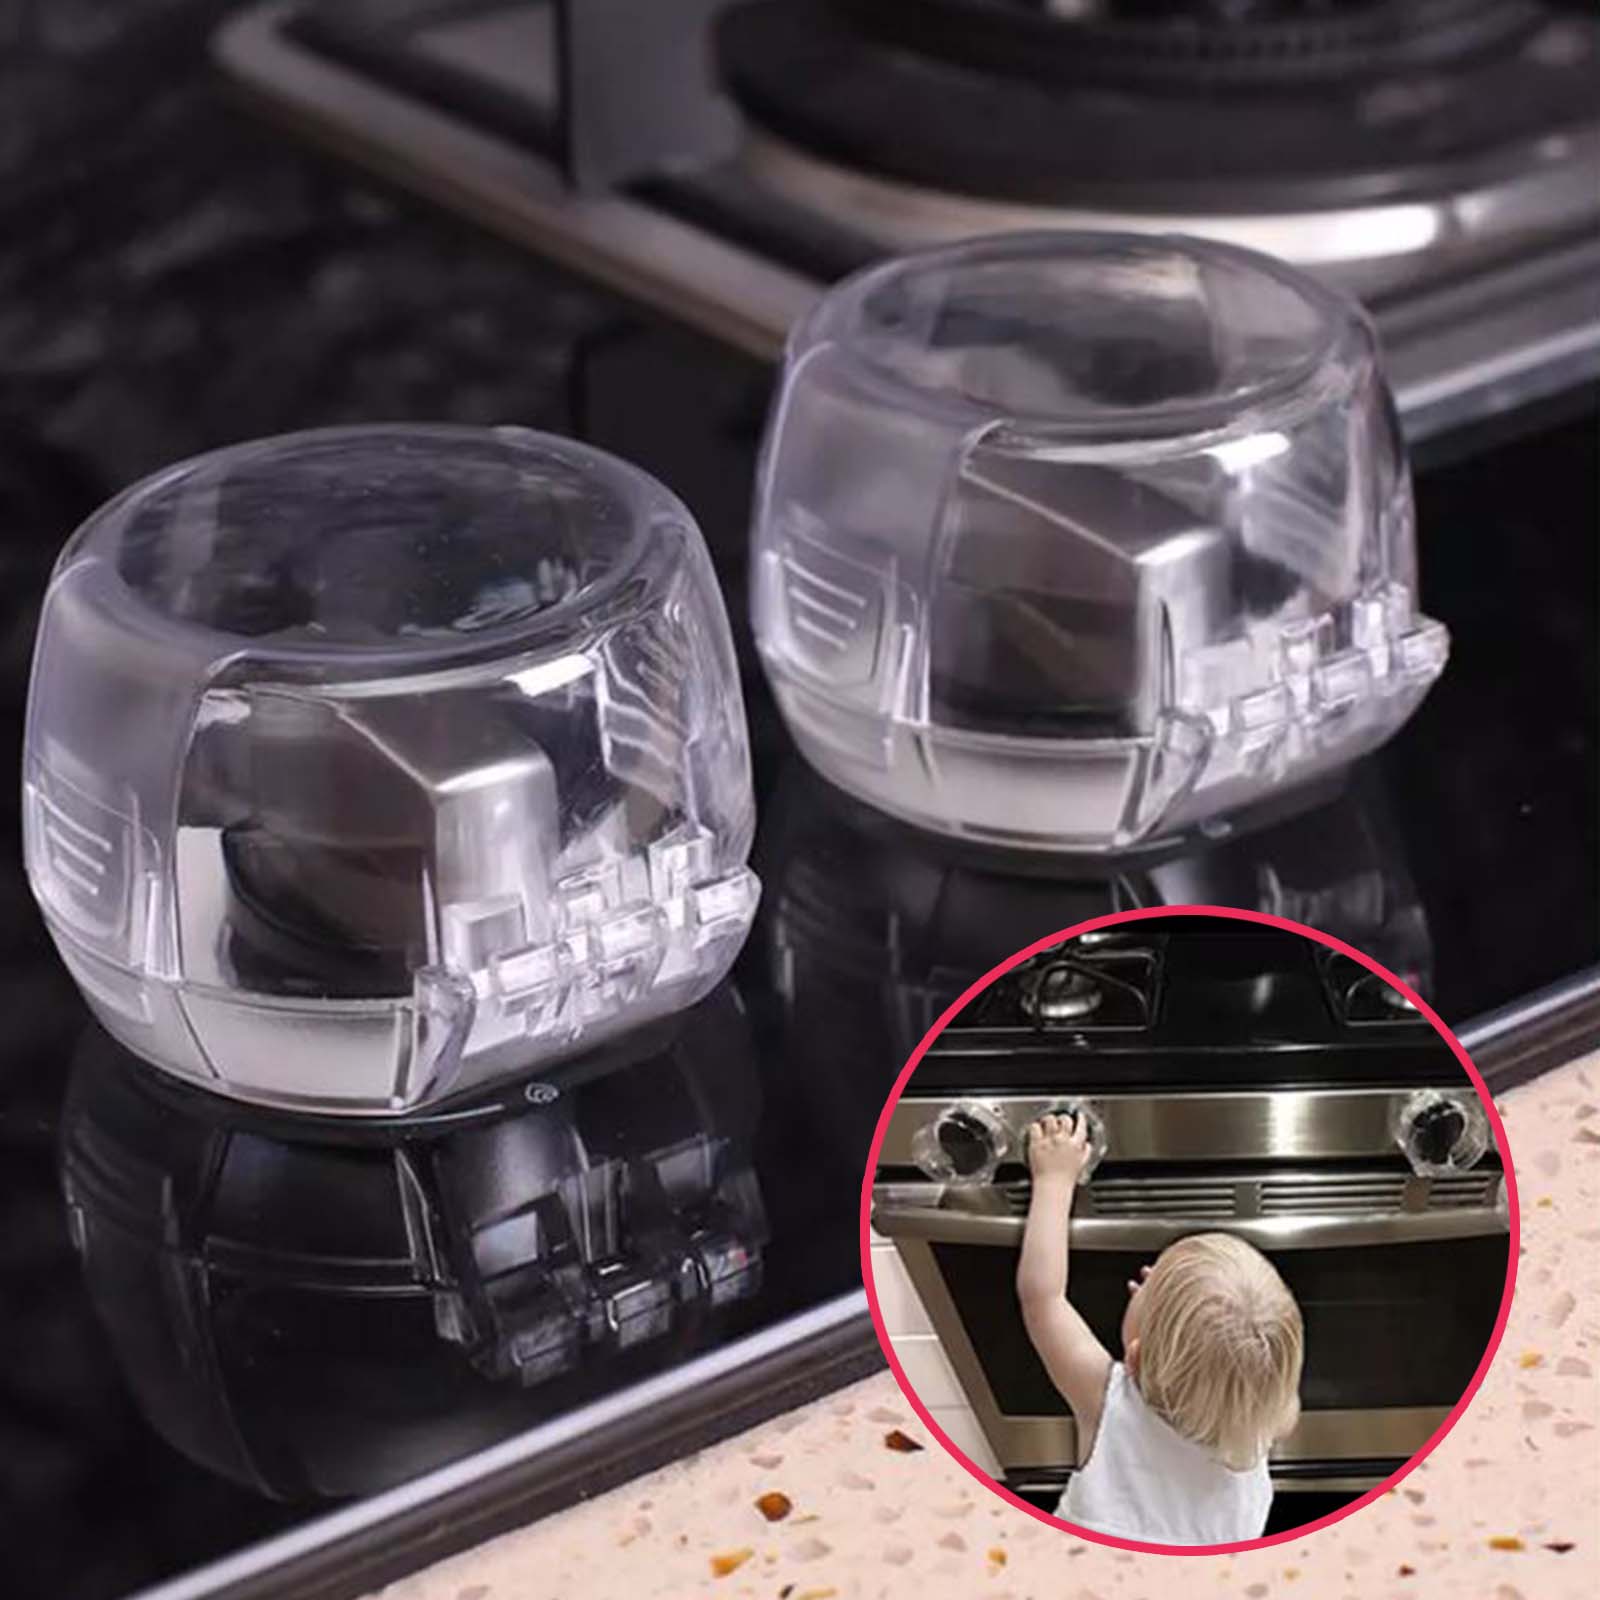 NWQEWDG Gas Stove Knob Cover Safety Burner Protector Childproof Guard Transparent Universa 4 Pcsl 